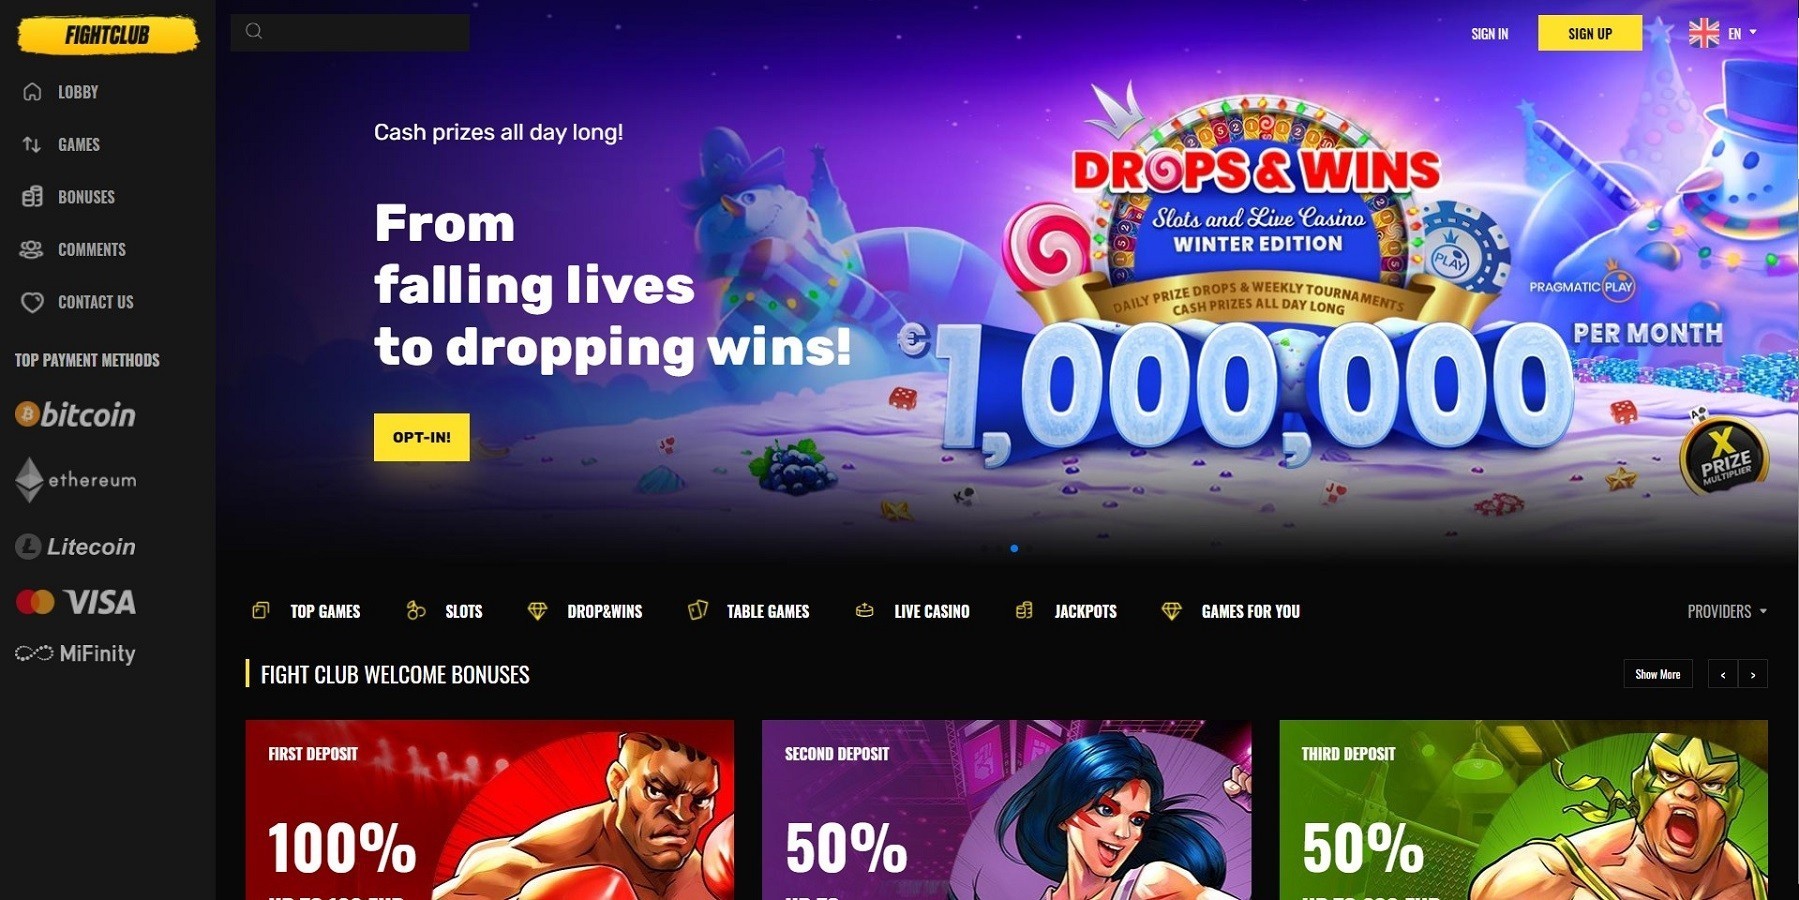 About Fight Club Casino